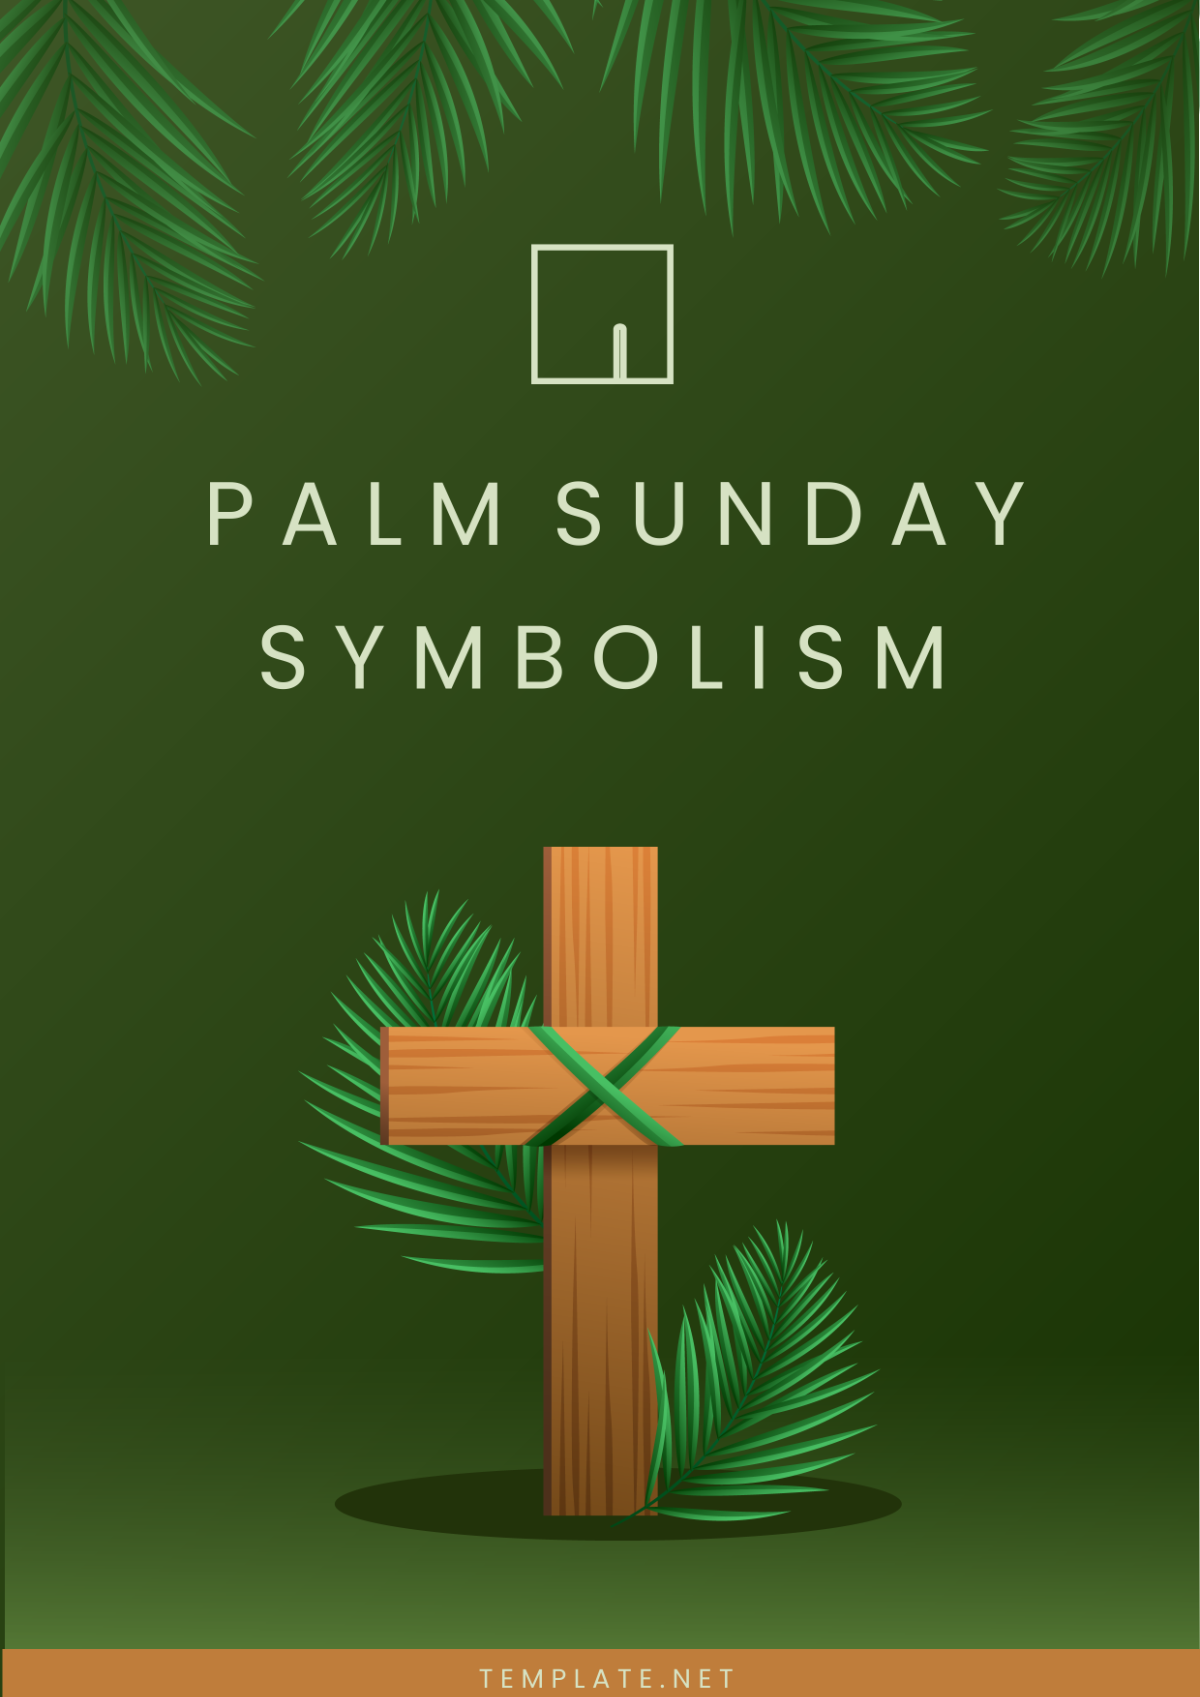 Palm Sunday Symbolism Cover Page Template